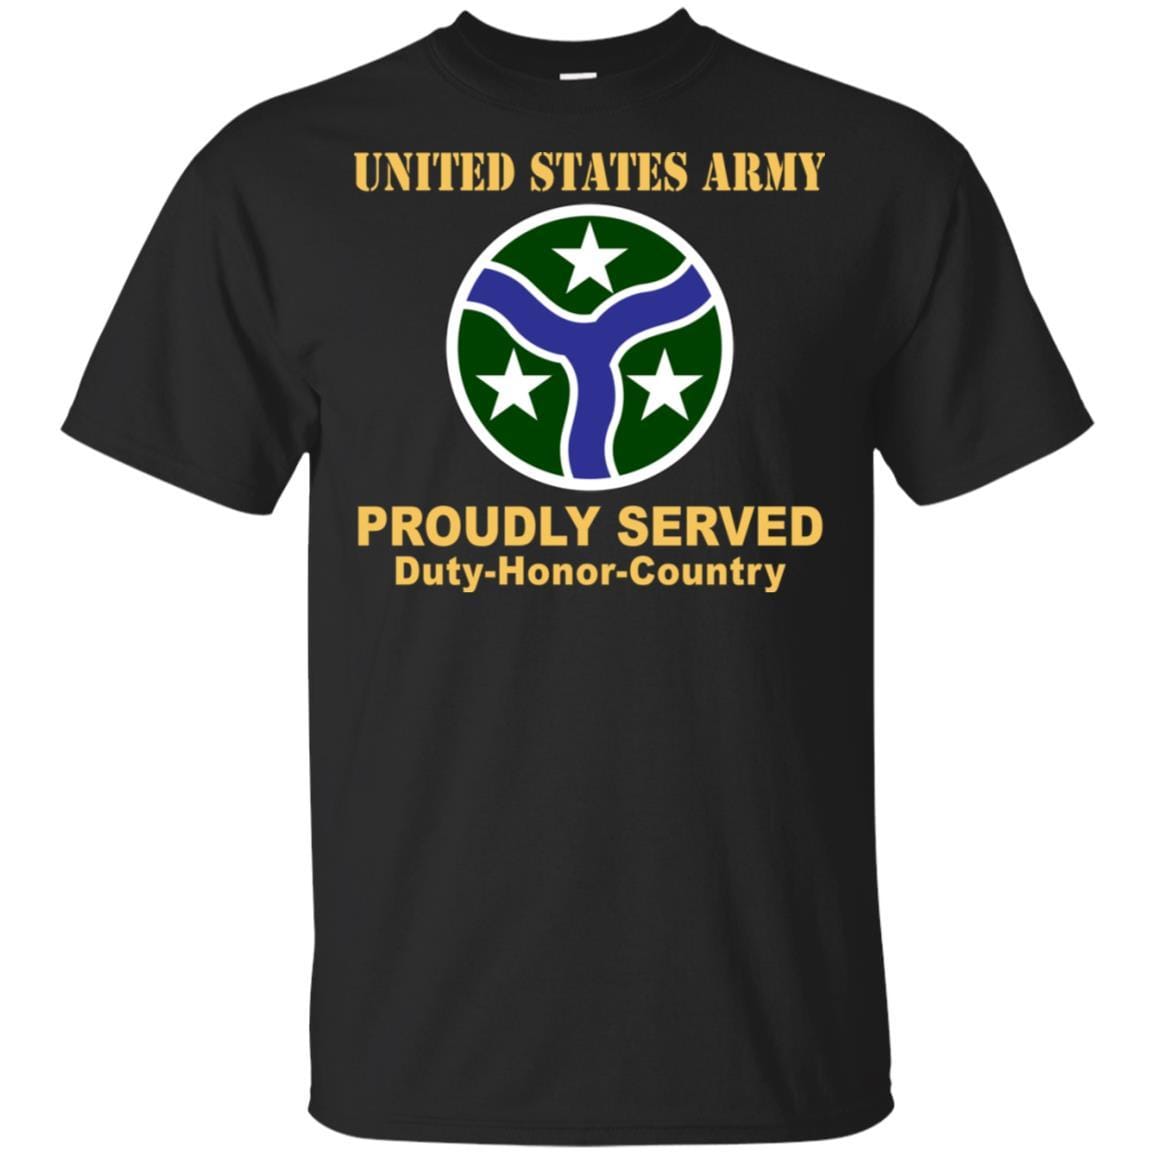 US ARMY 278TH ARMORED CAVALRY REGIMENT- Proudly Served T-Shirt On Front For Men-TShirt-Army-Veterans Nation